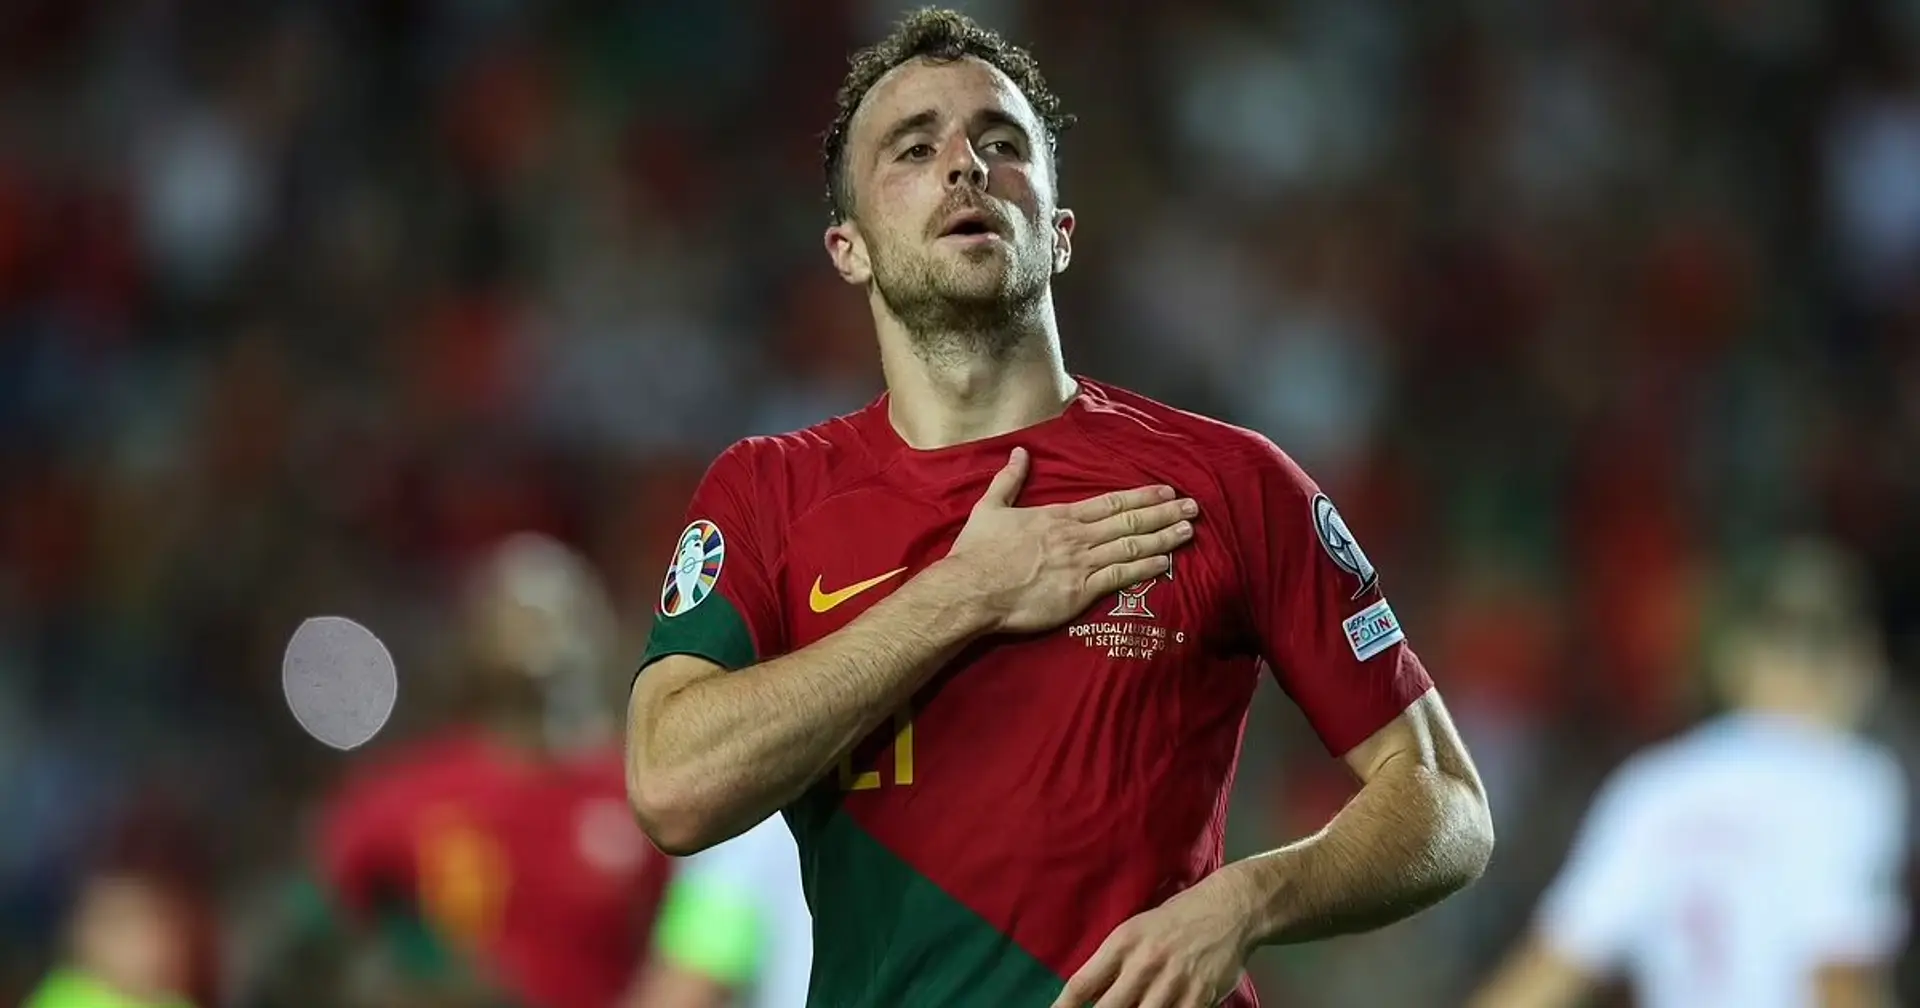 Diogo Jota bags two goals and an assist as Portugal thump Luxembourg 9-0